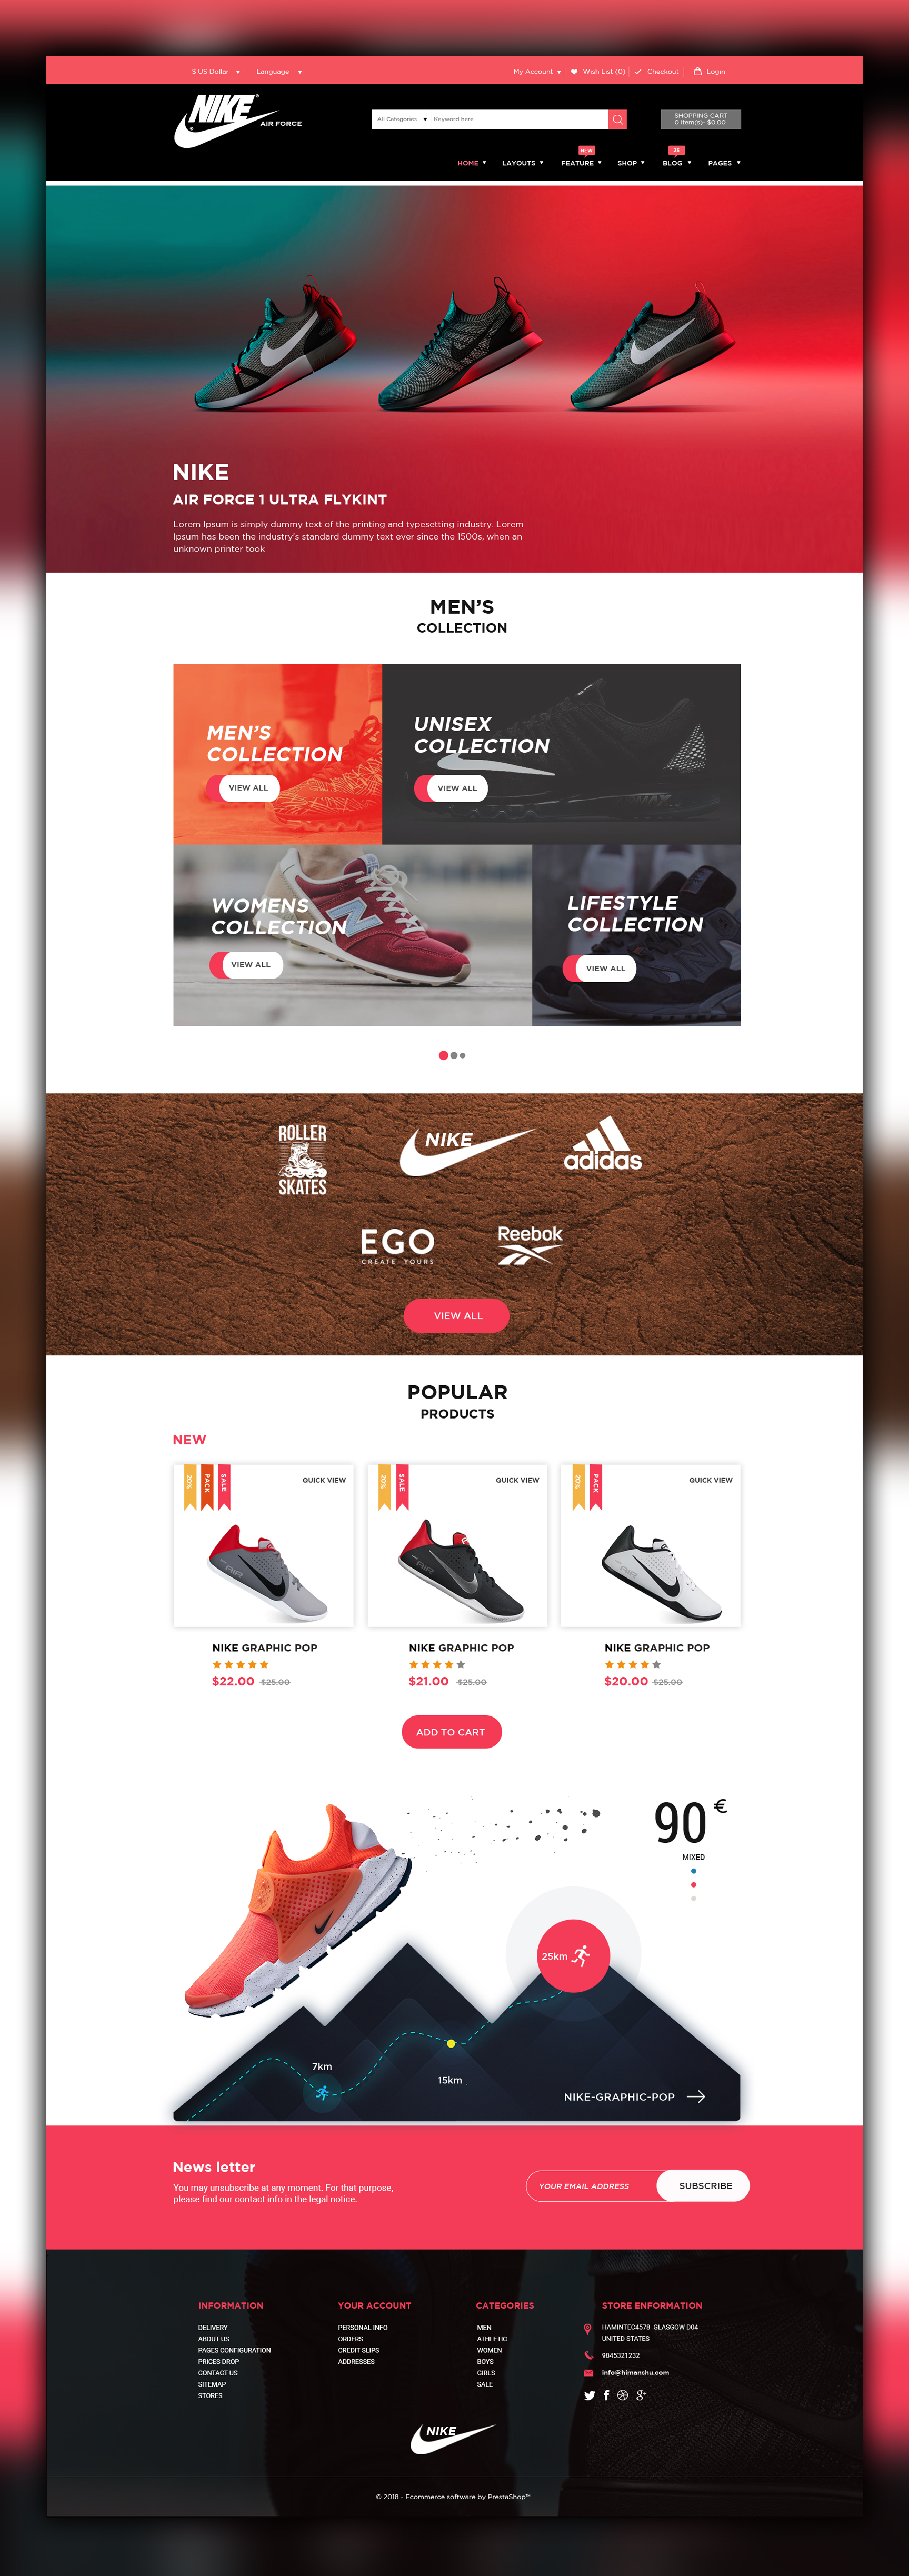 New landing page for E-Commerce